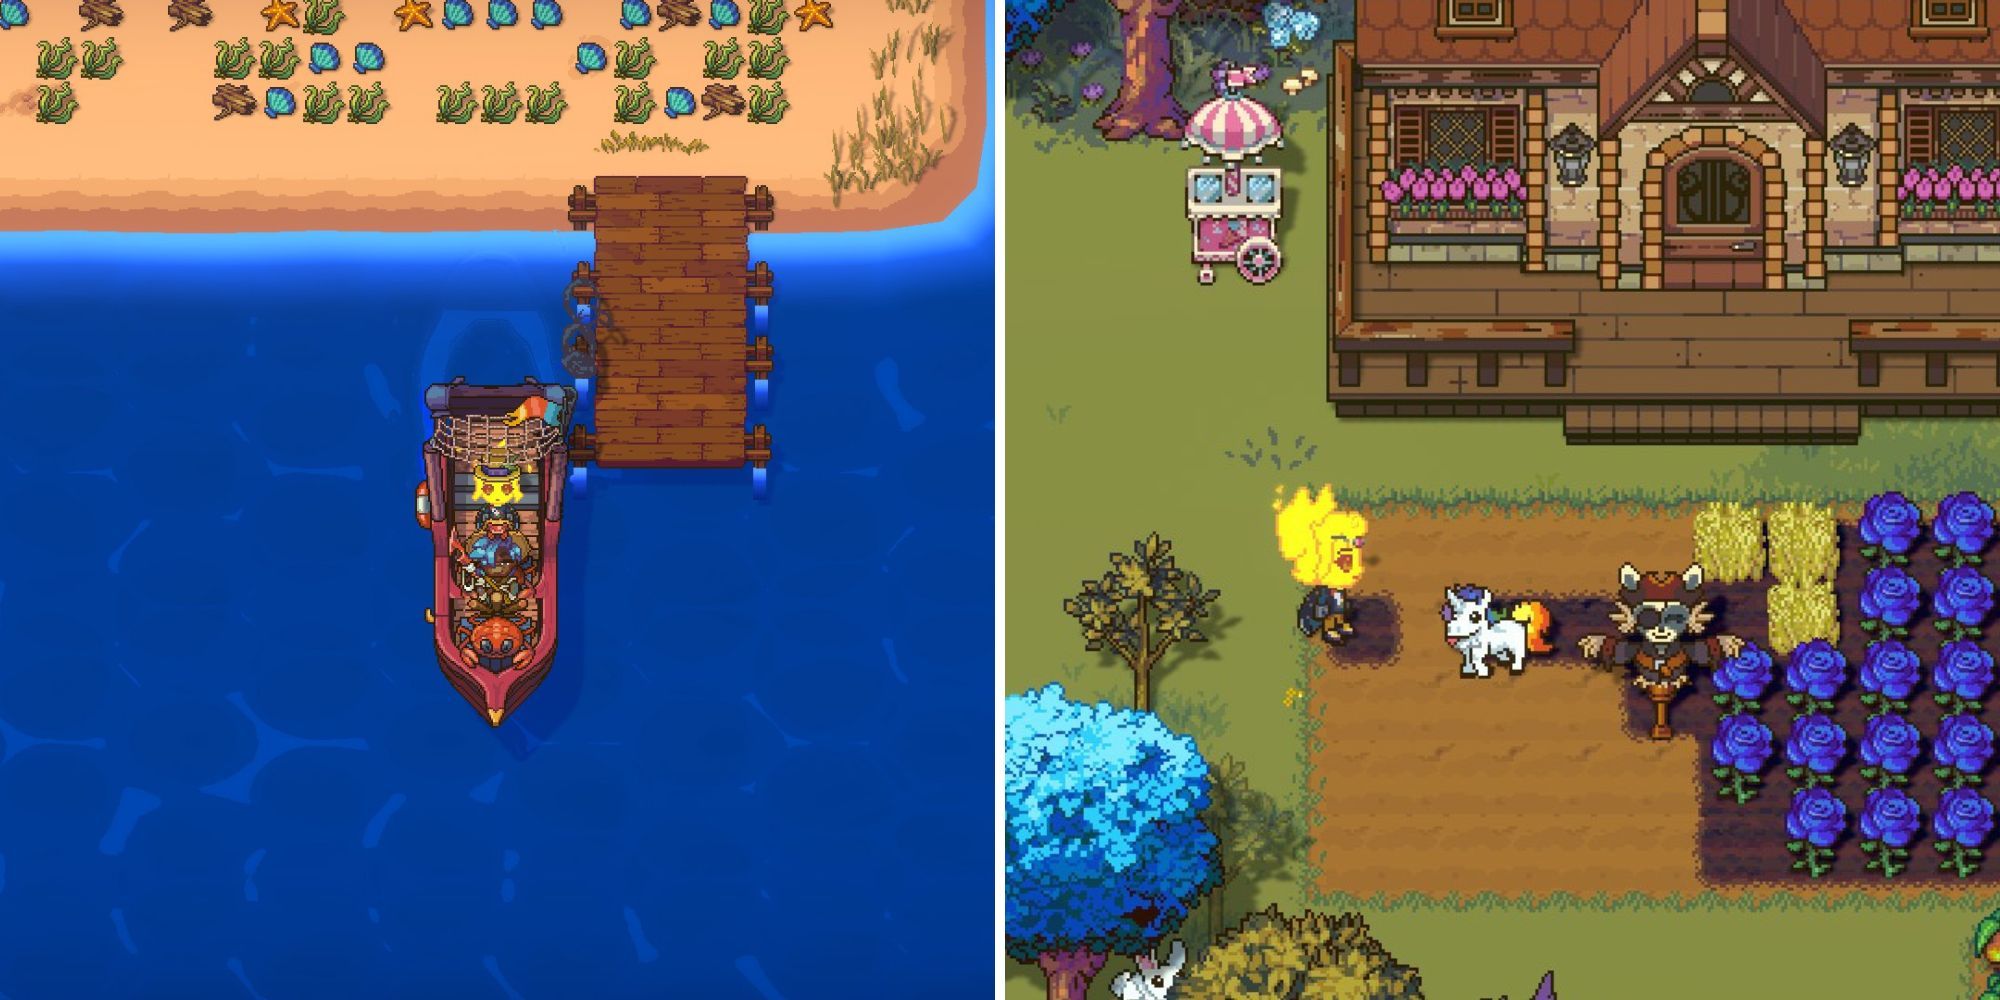 Elemental player and Peter stand in Peter's boat by the southern pier; Elemental player and pet unicorn stand on tilled land outside of the player's home